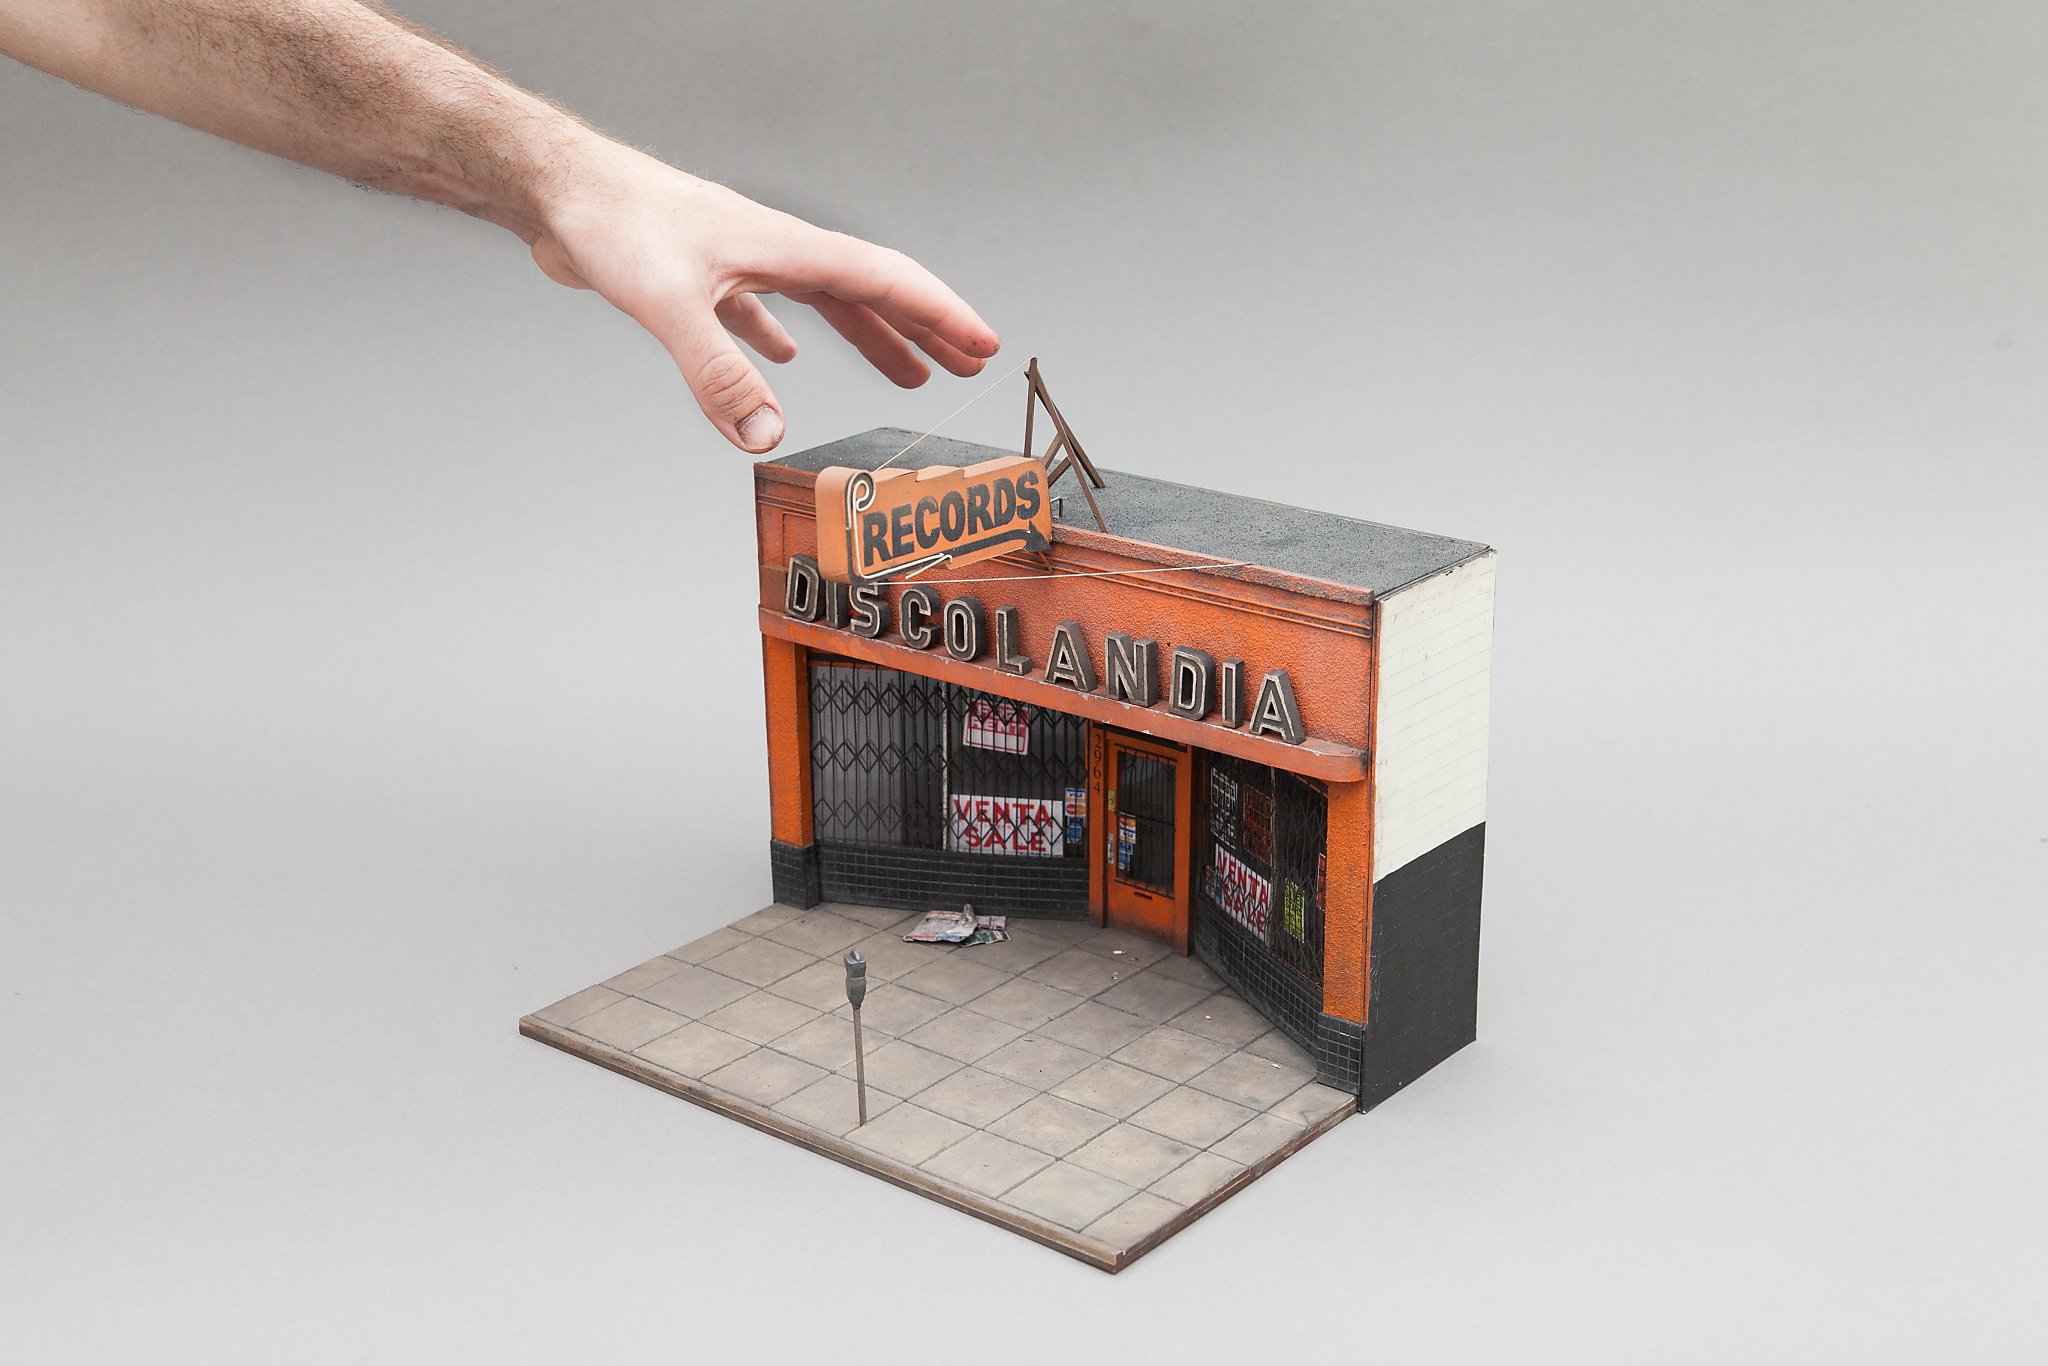 Art exhibit explores the tiny, detailed worlds of dioramas